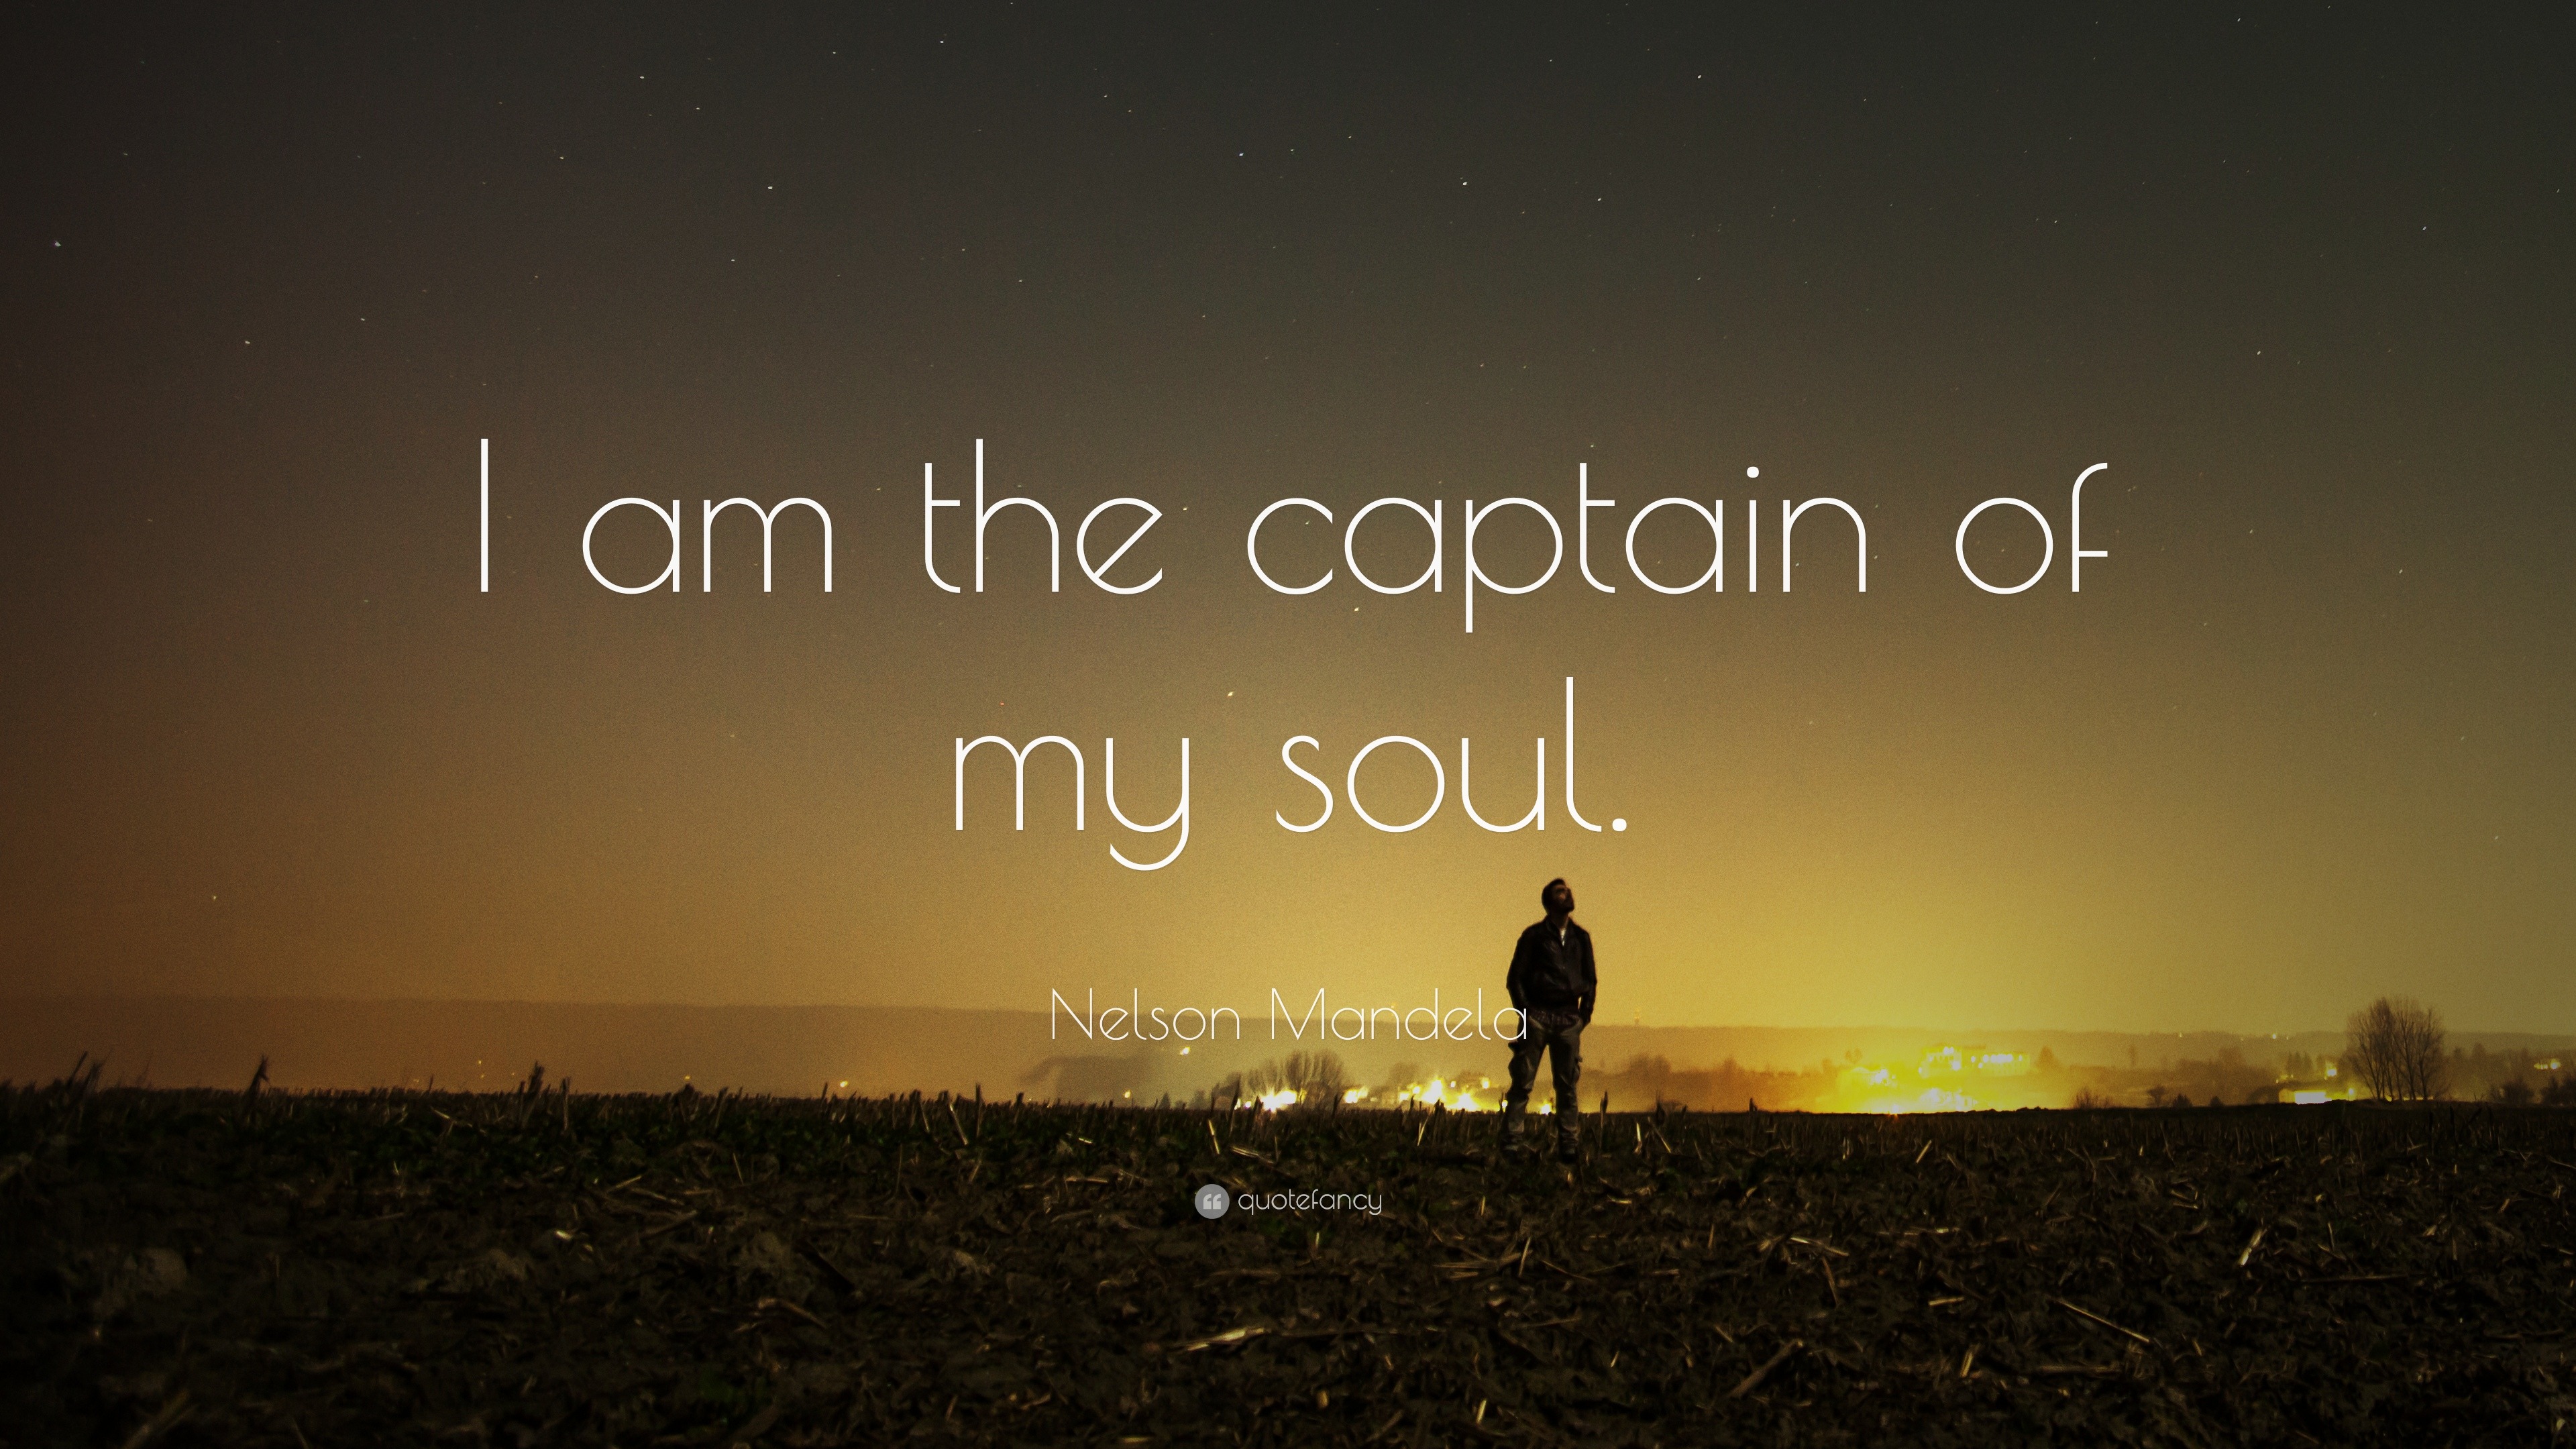 Nelson Mandela Quote: “I am the captain of my soul.”